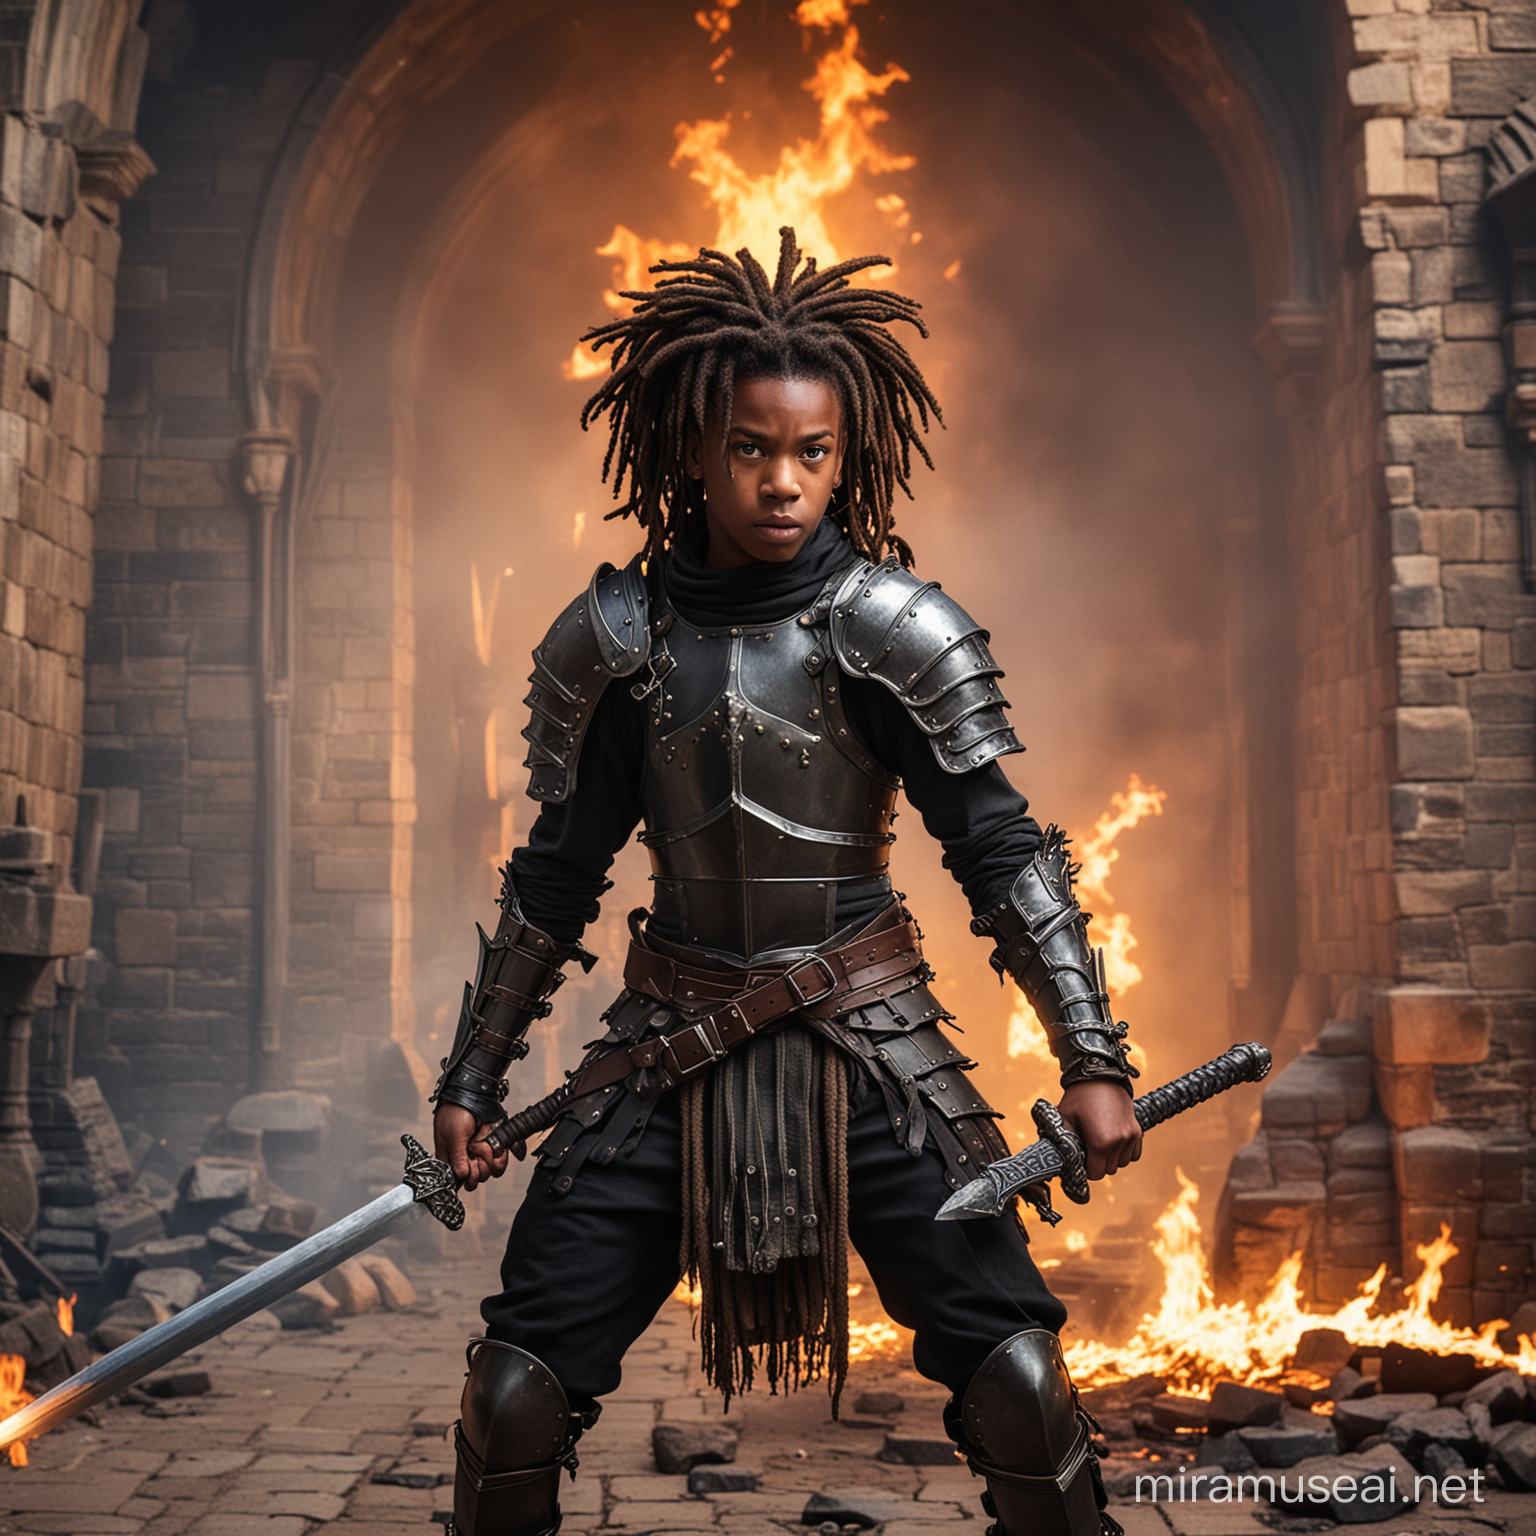 A very young black teenage boy warrior with dreadlocks and wearing an armor, carrying a sword and fighting in a castle, fire background.